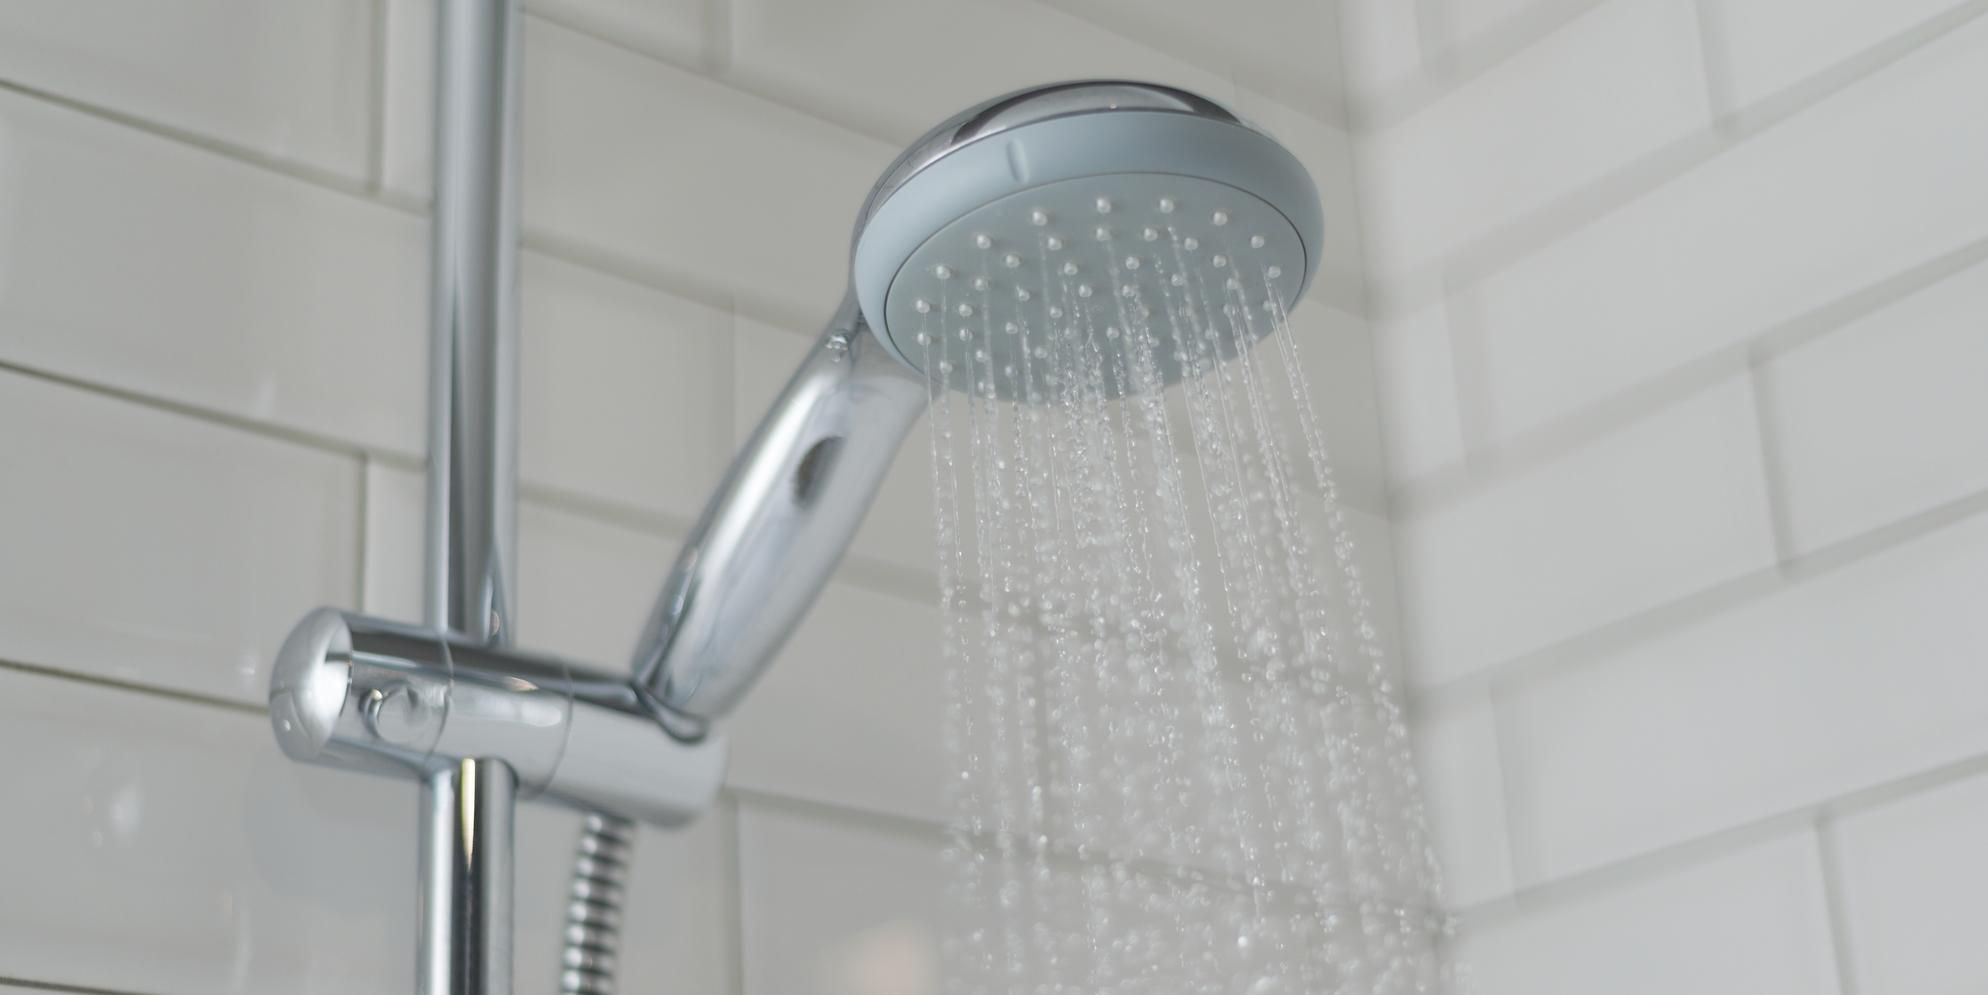 Why Does Shower Water Get Hot When Flushing the Toilet? - Extreme What Happens If You Flush The Toilet While Showering